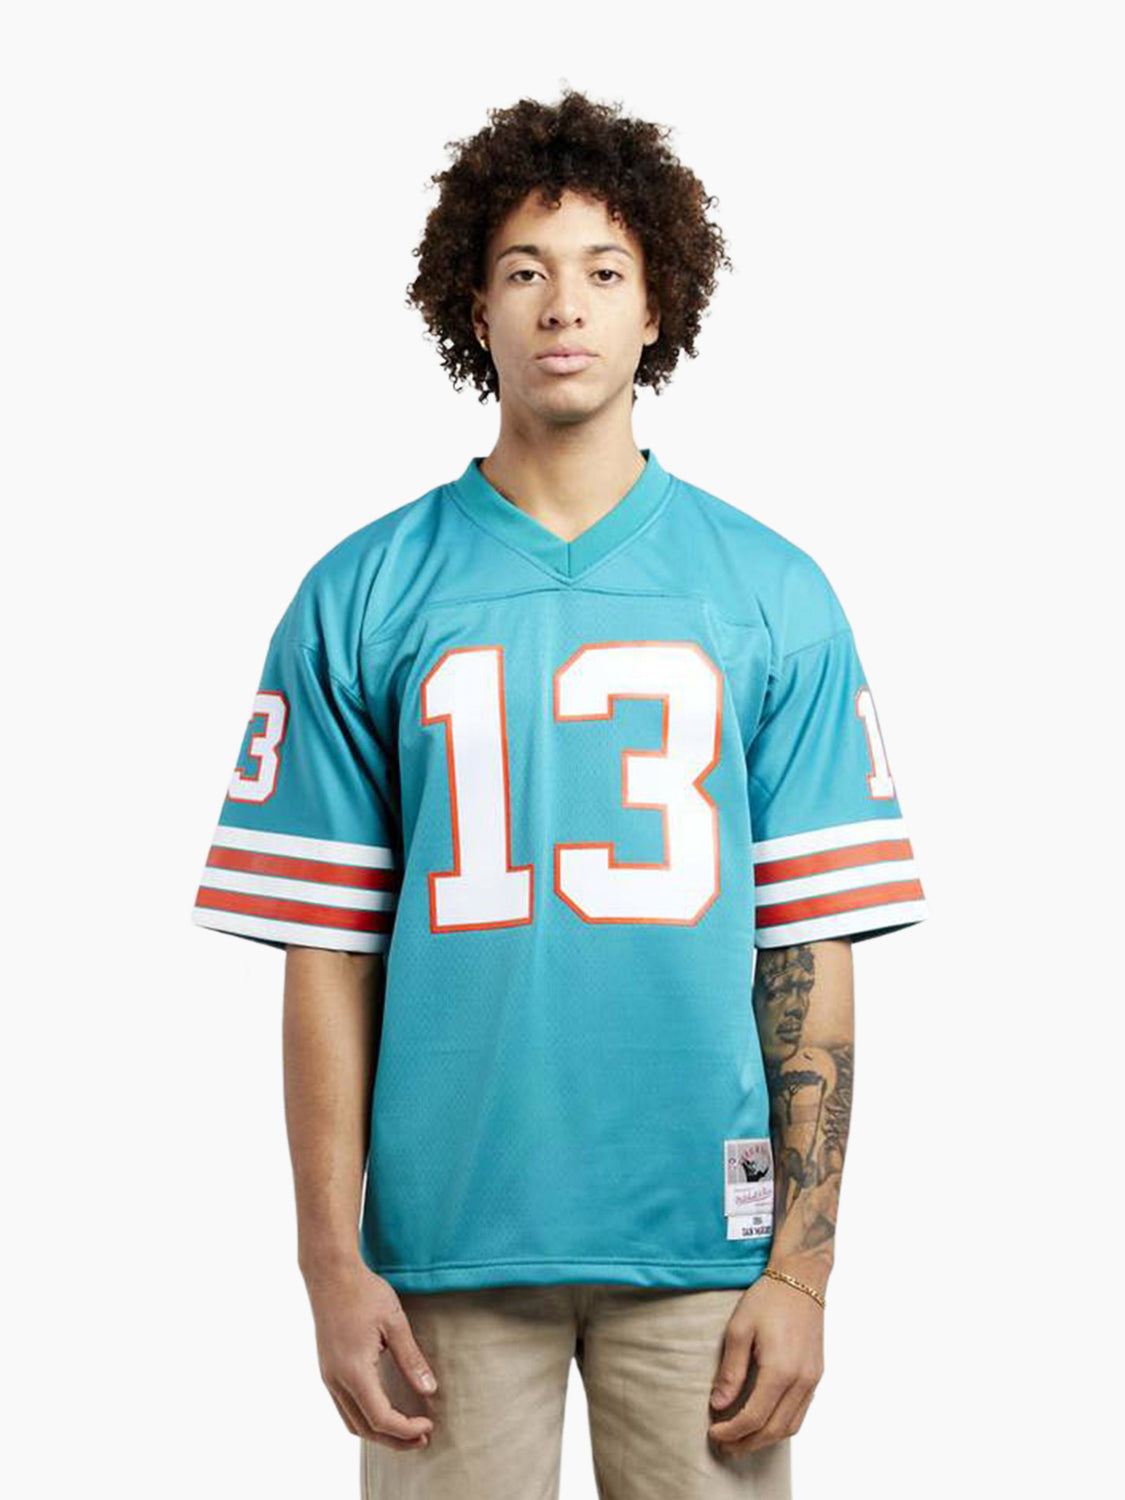 Miami Dolphins Apparel, Dolphins Merchandise, Gear & Clothing